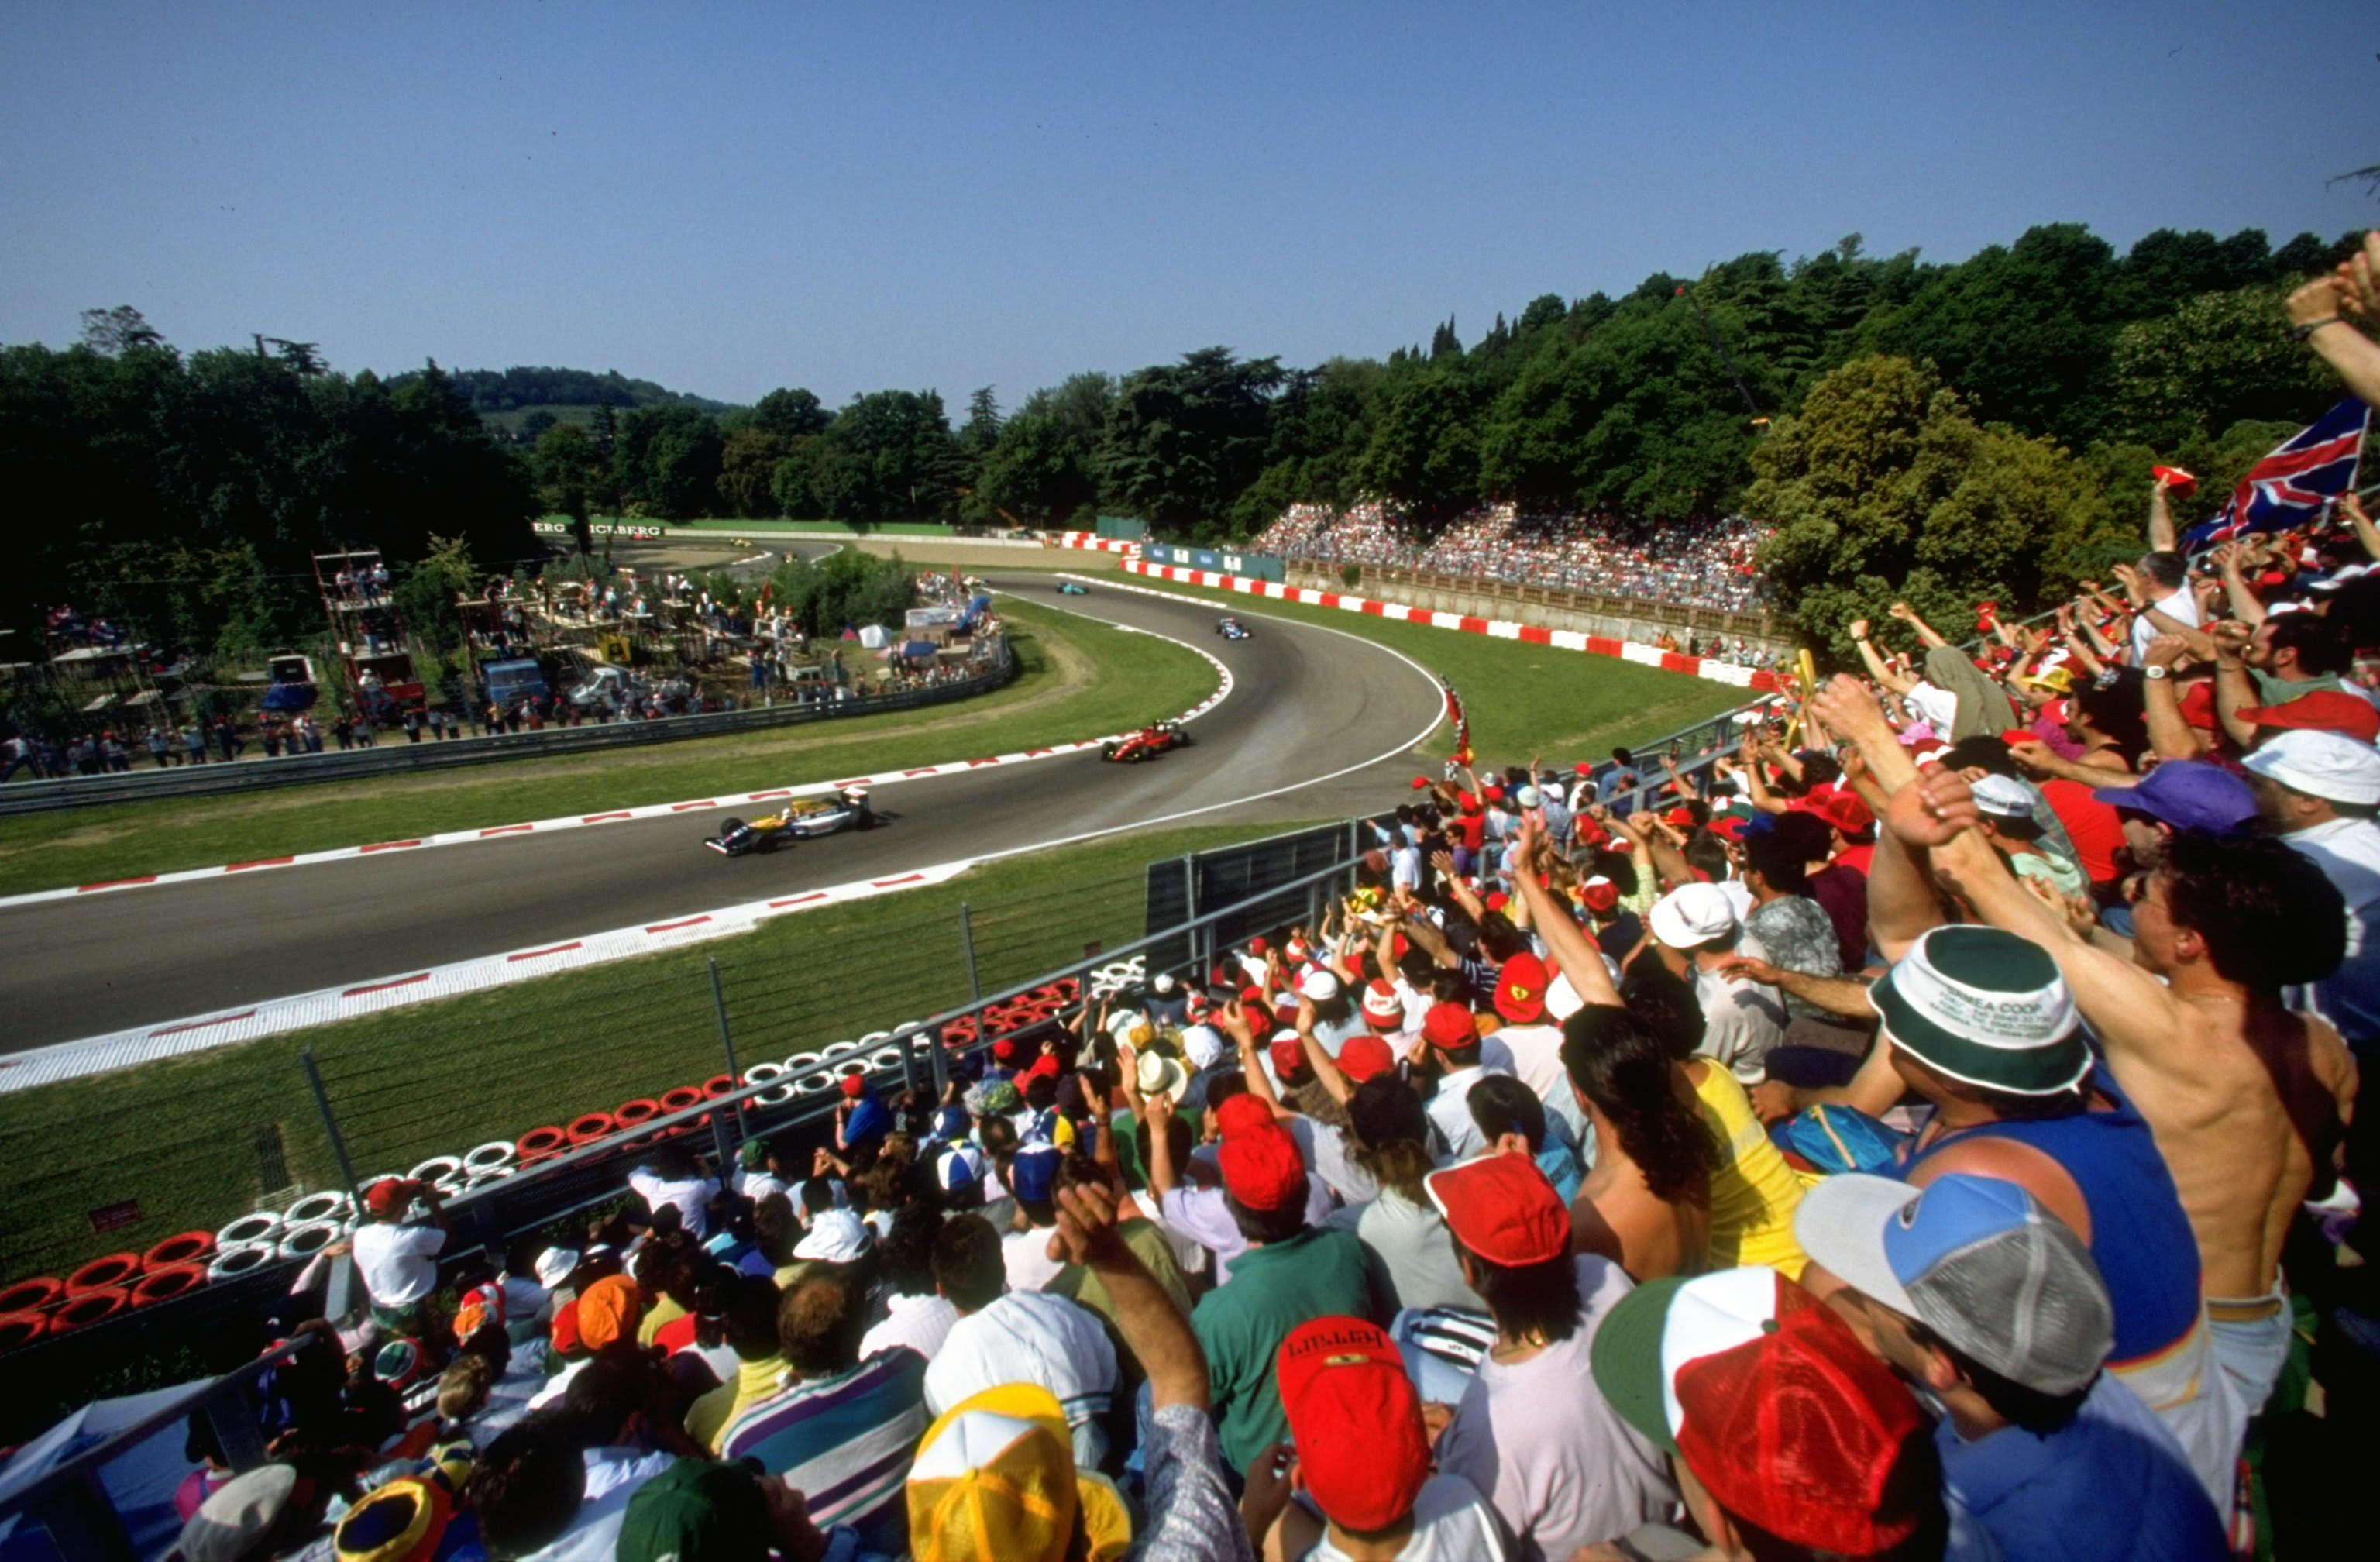 What time is the 2020 Emilia Romagna Grand Prix at Imola on and how can I watch it? Formula 1®